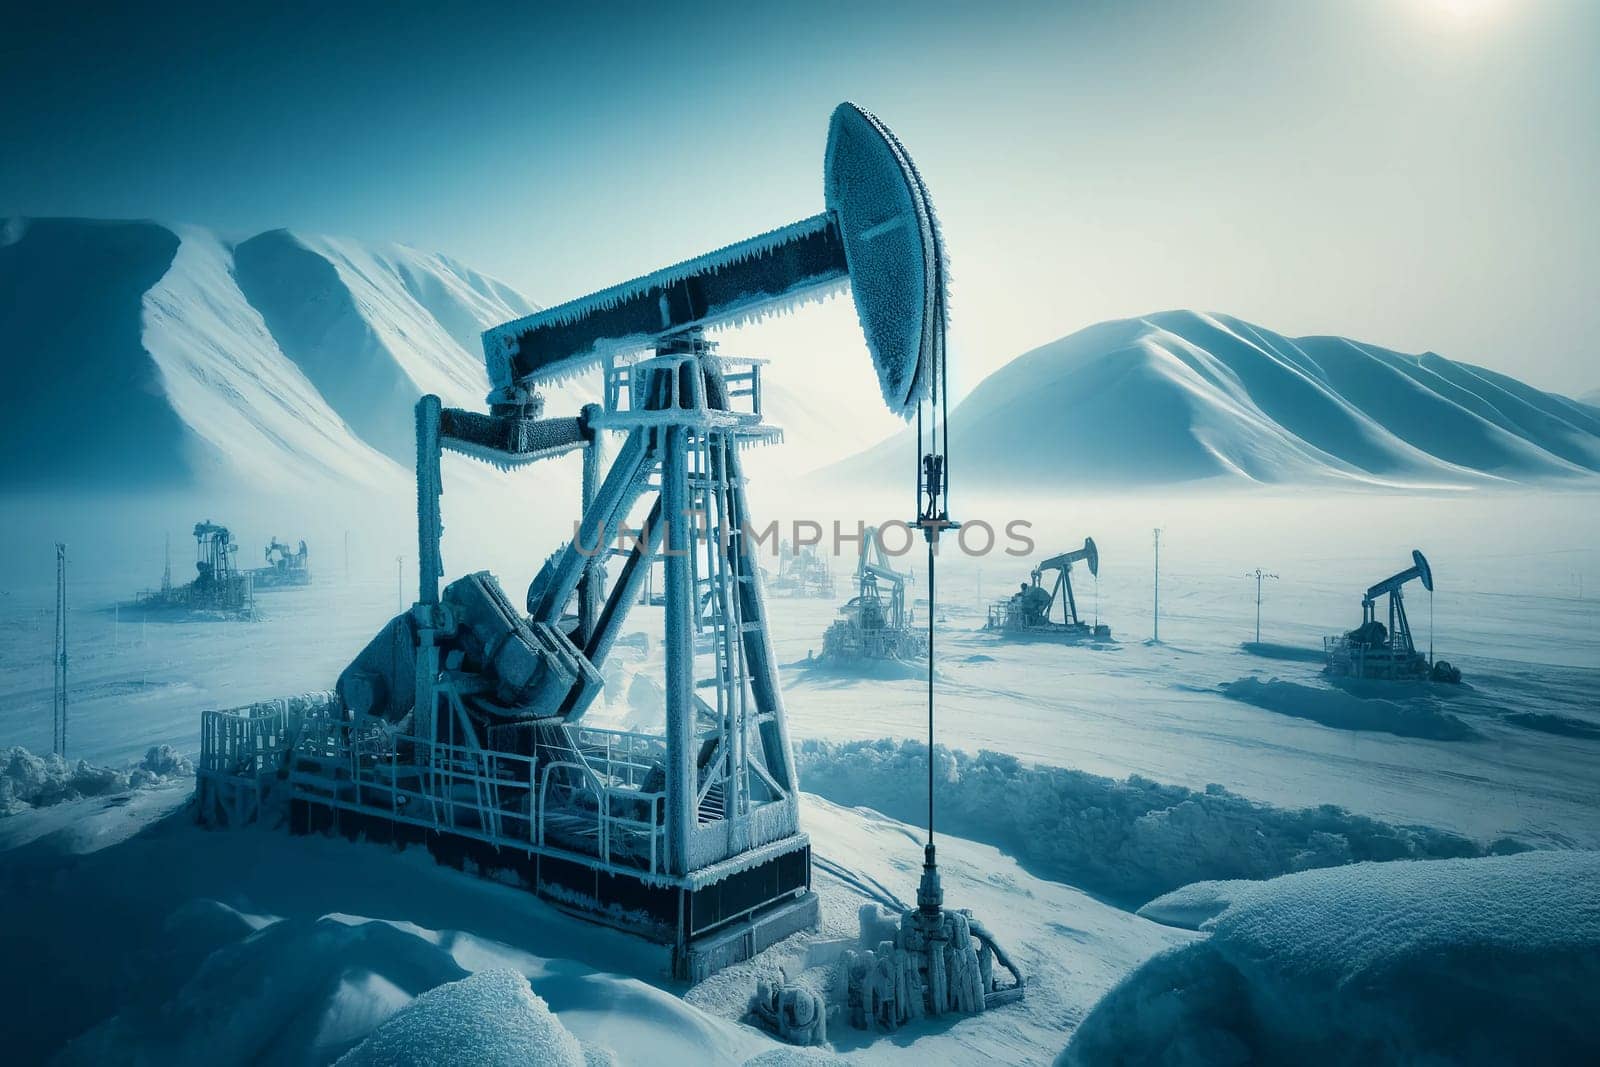 Oil drilling rigs in the Arctic among snow-capped mountains in extreme conditions by Annado